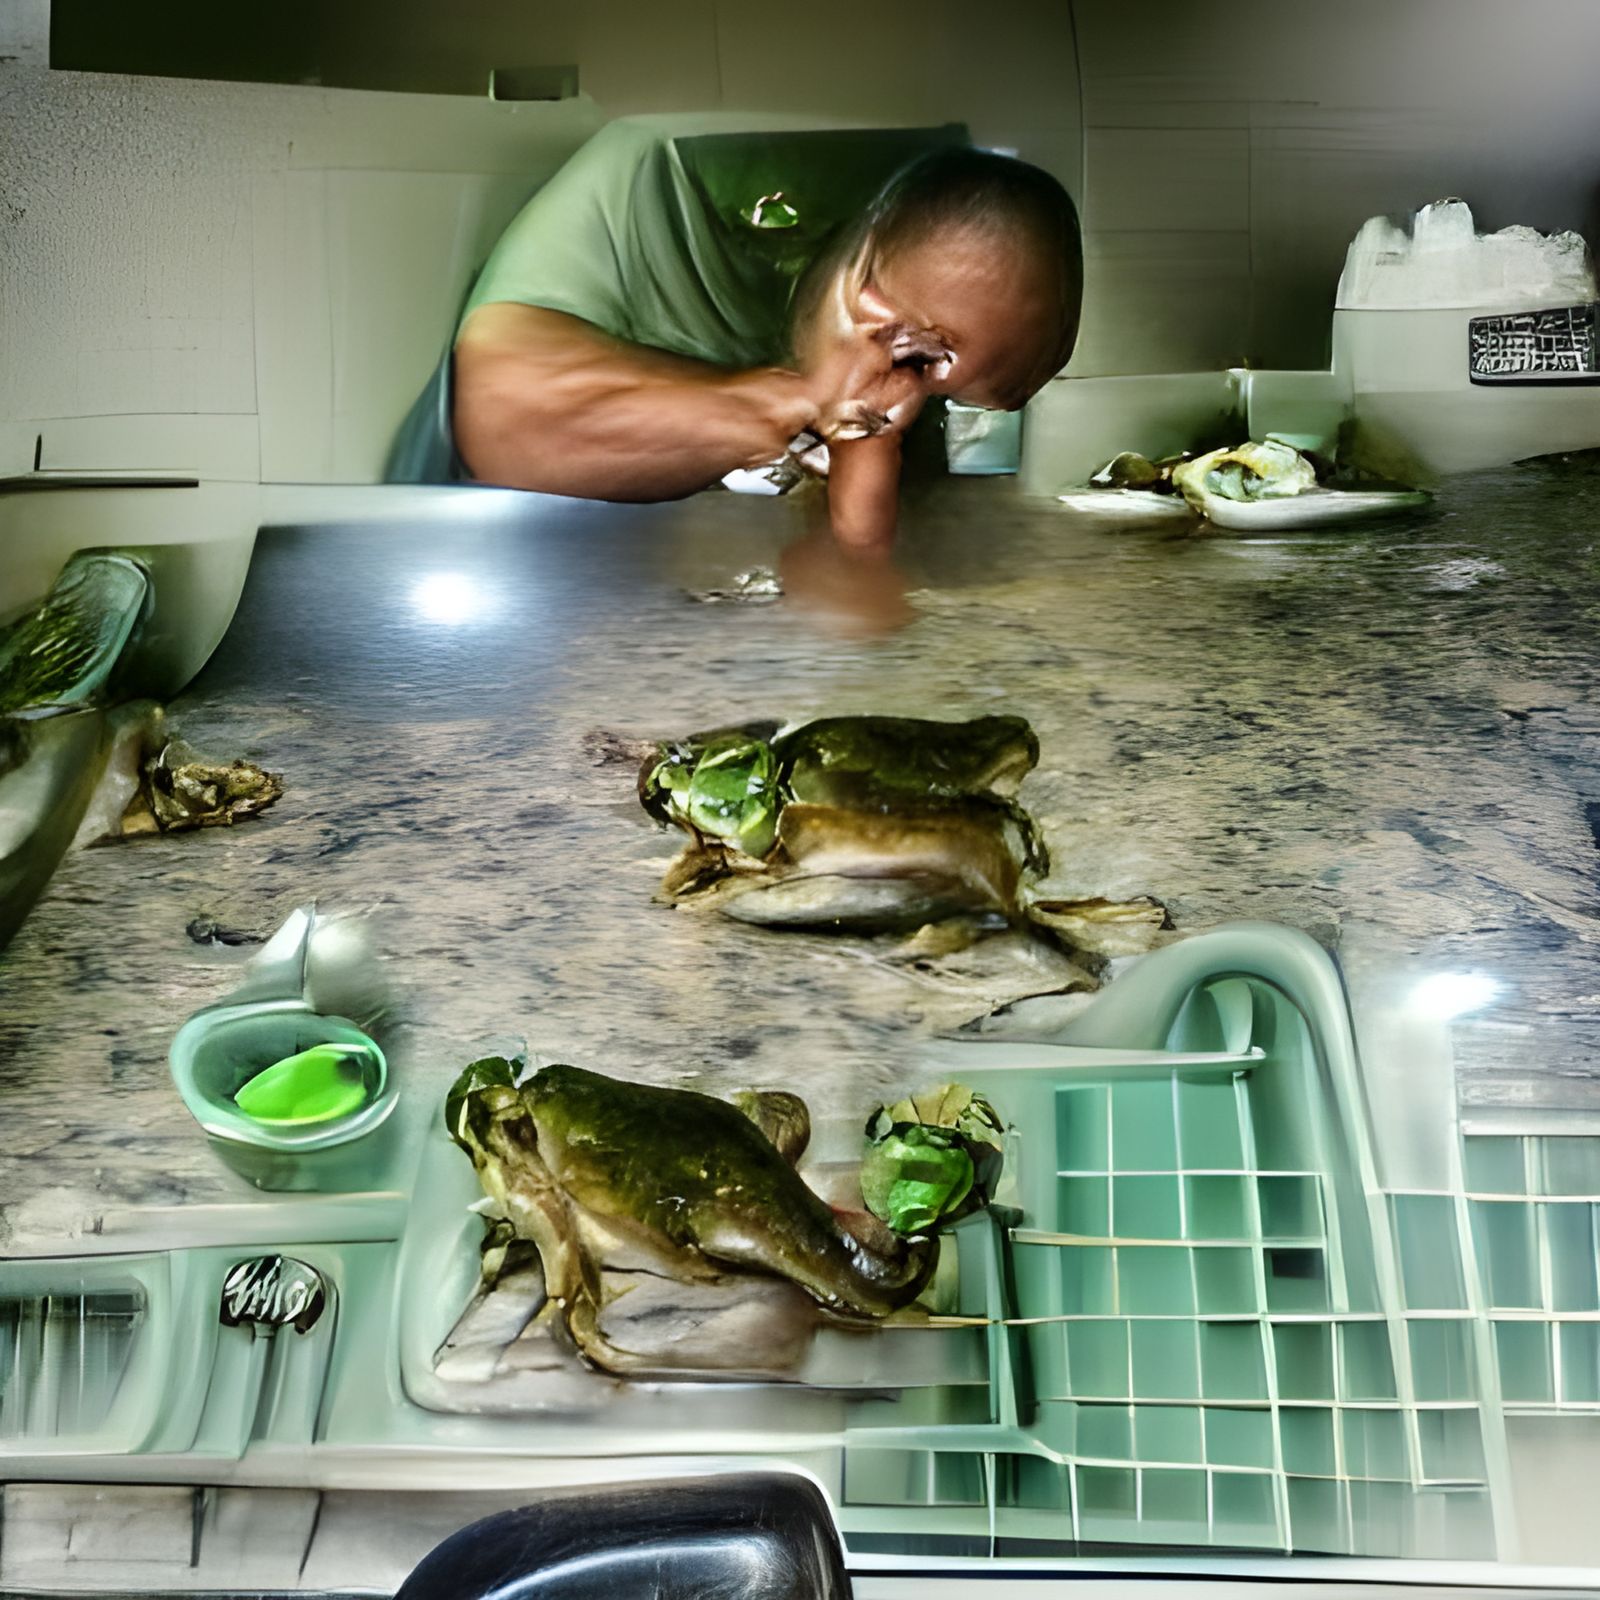 My uncle eating frogs in a dim kitchen 